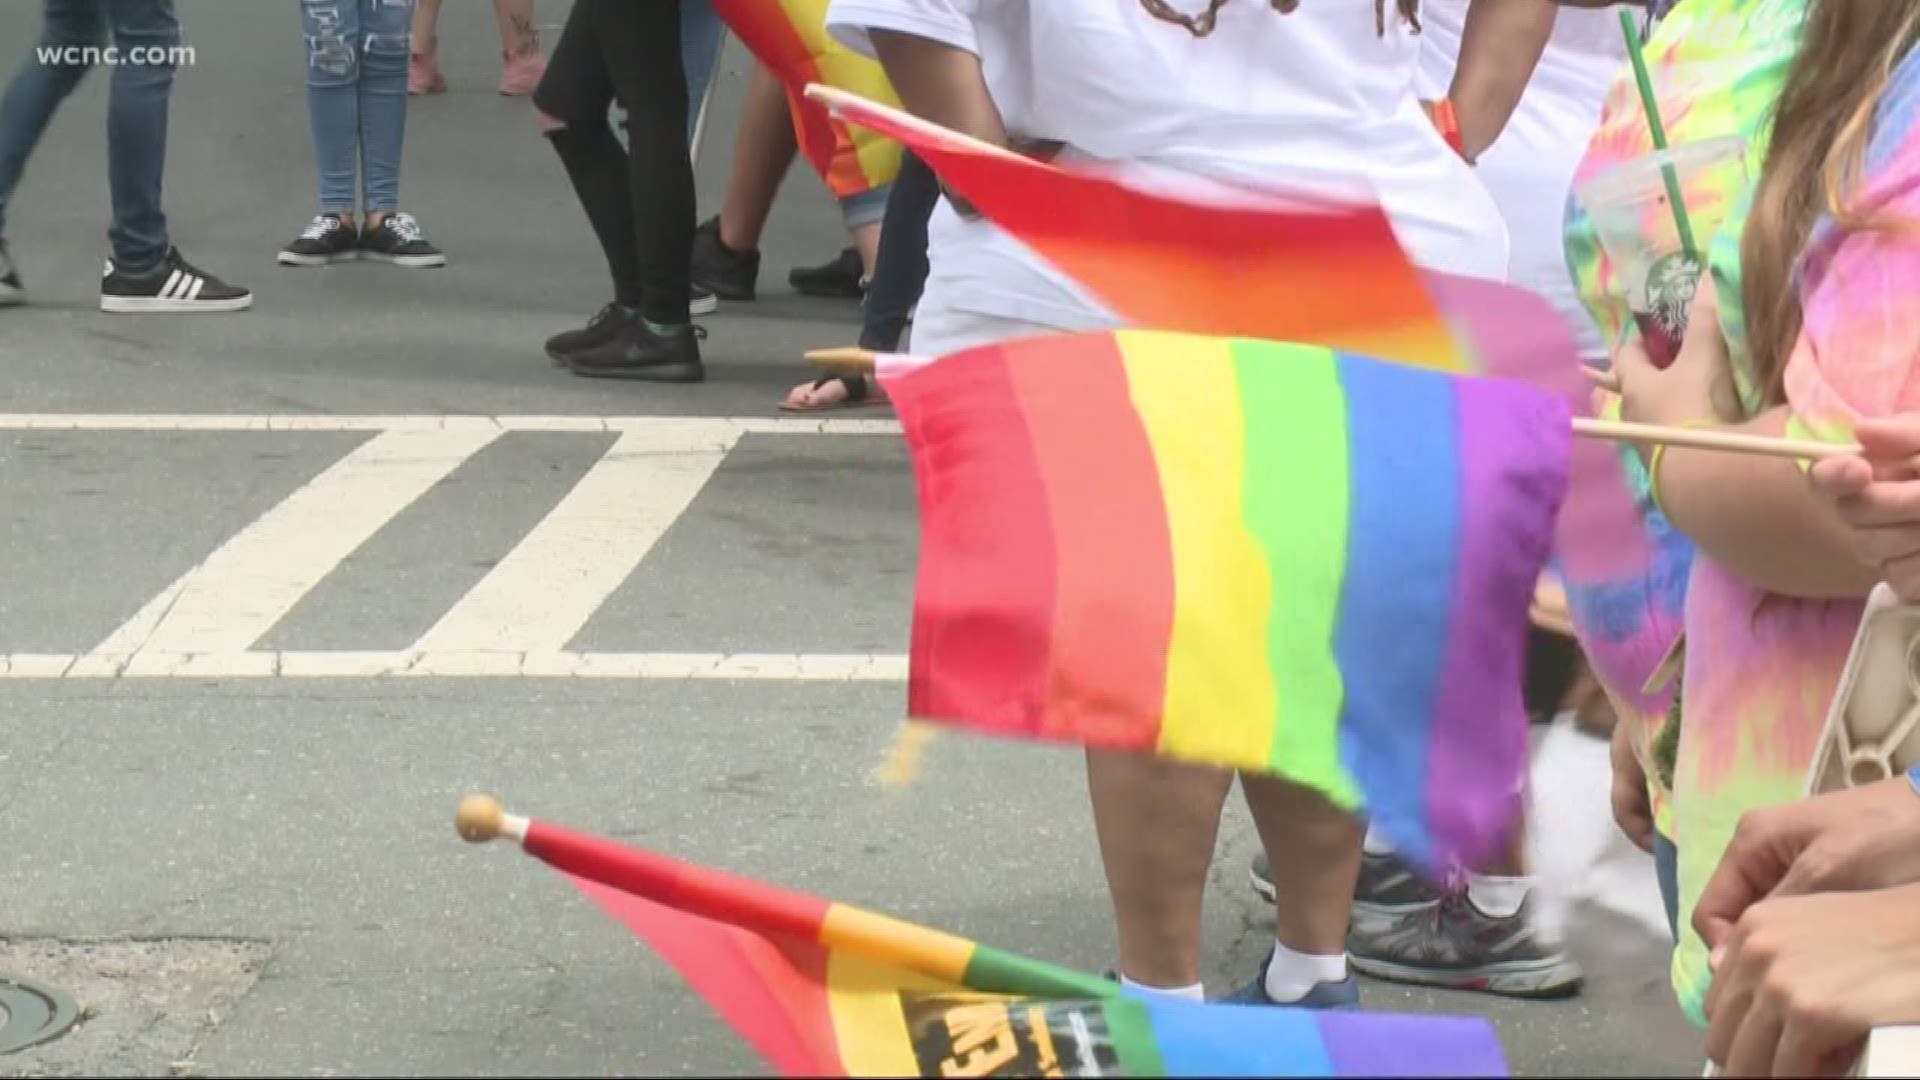 This weekend is a chance for the local LGBTQ community to celebrate the strides it's made toward equality.